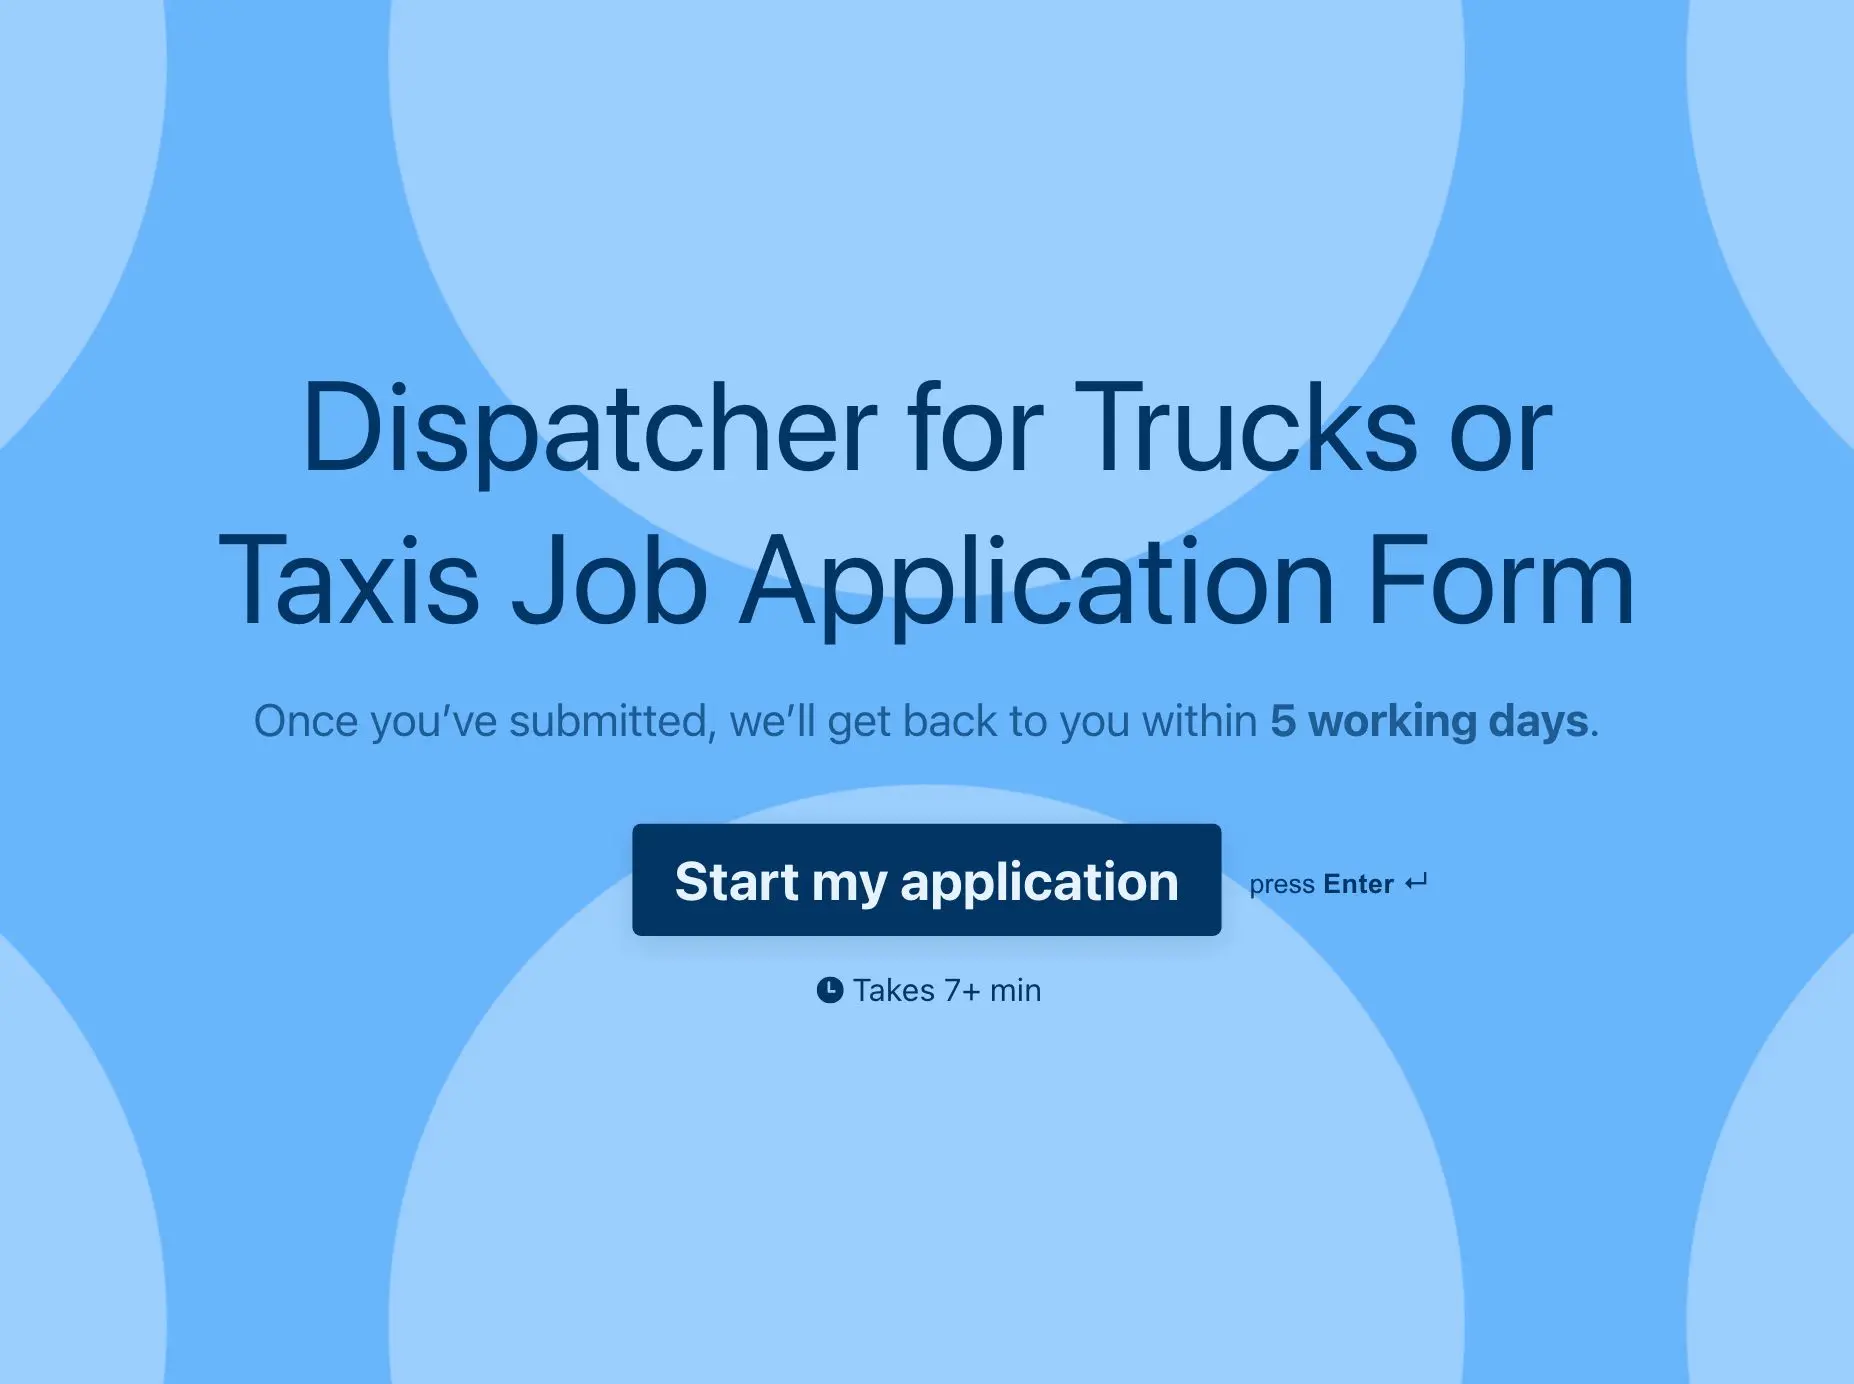 Dispatcher for Trucks or Taxis Job Application Form Template Hero